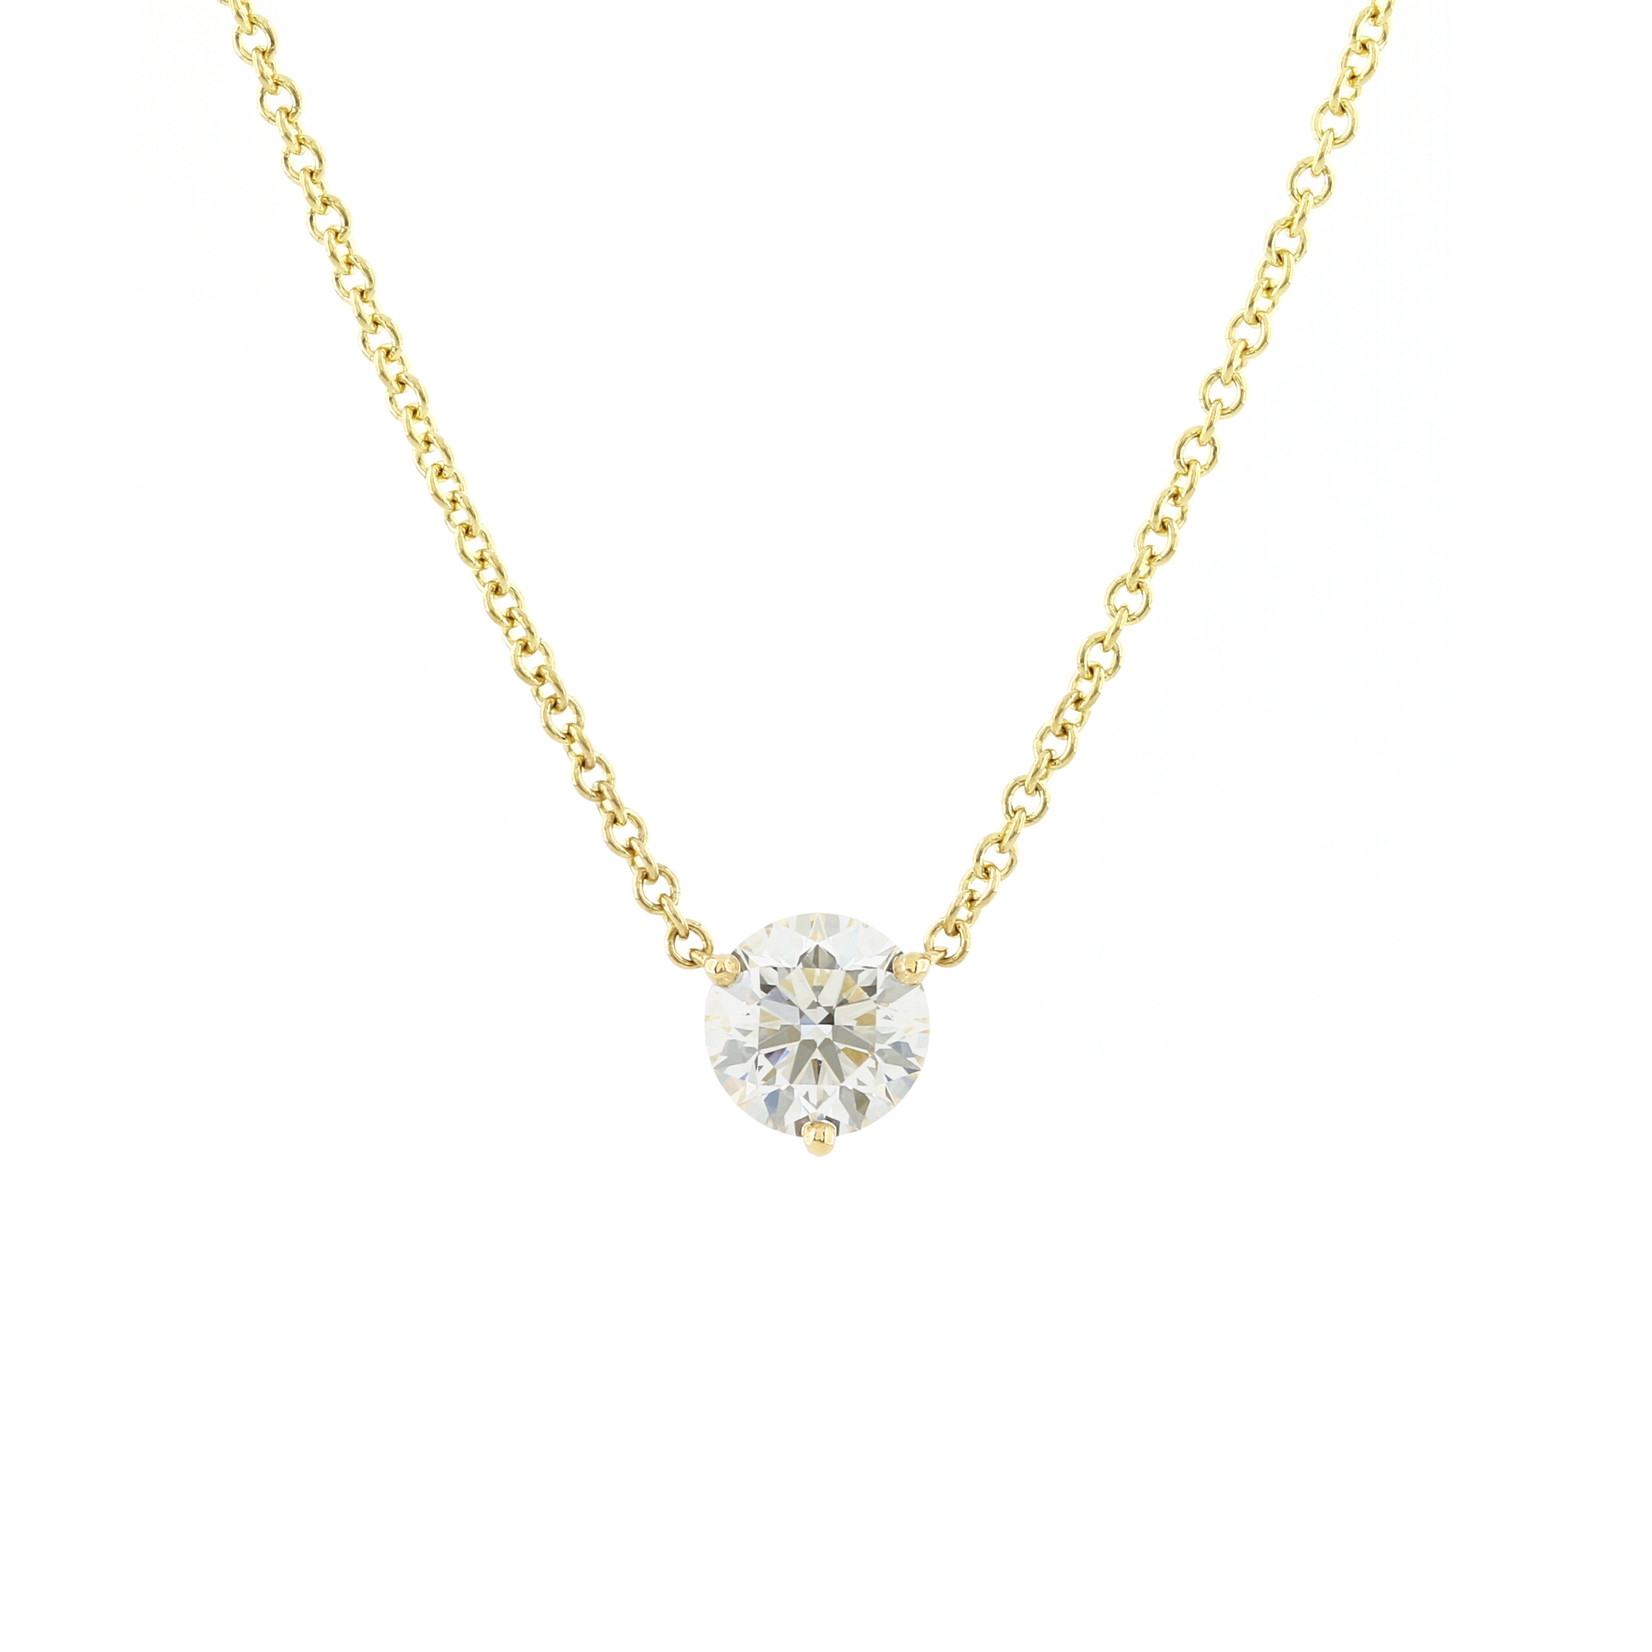 Baxter Moerman Diamond Solitaire Necklace 3/4ct in Yellow Gold